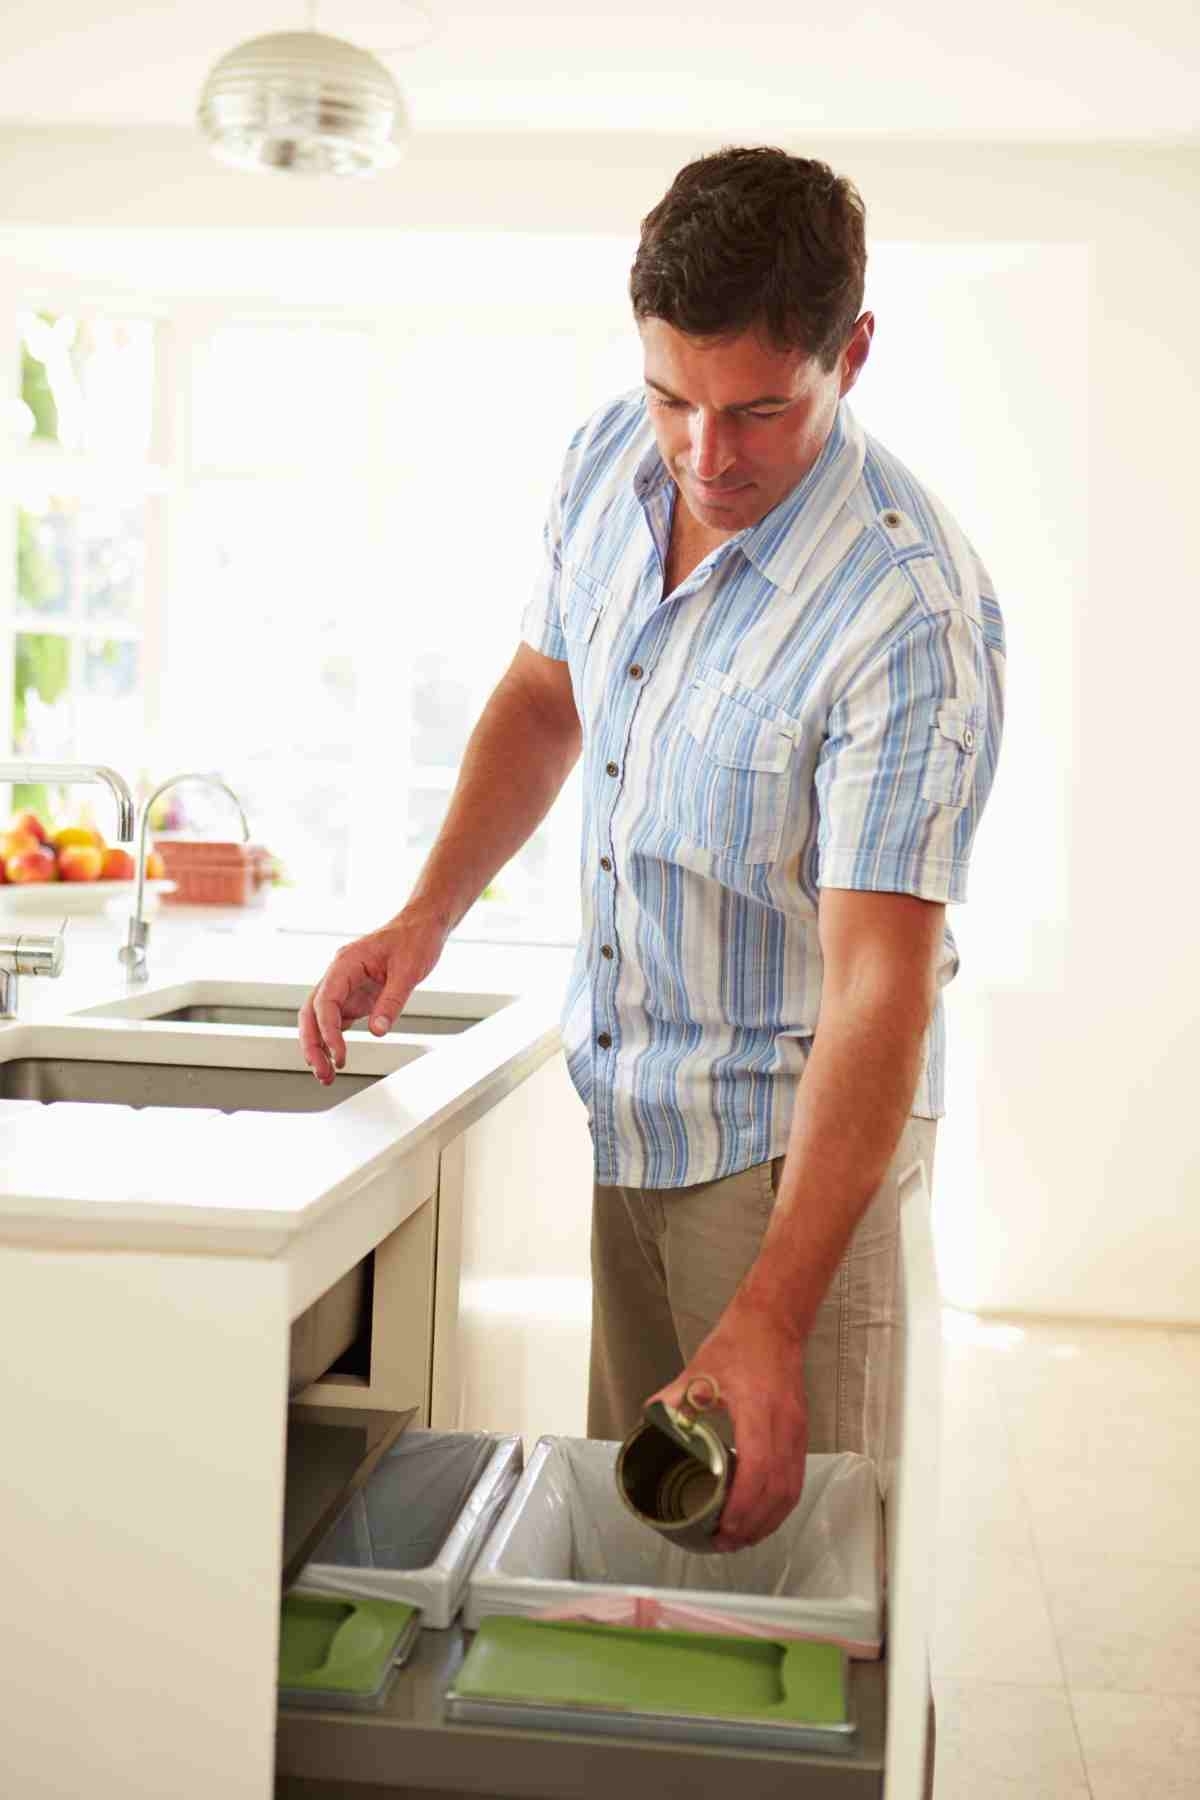 image showing man recycling in his own kitchen